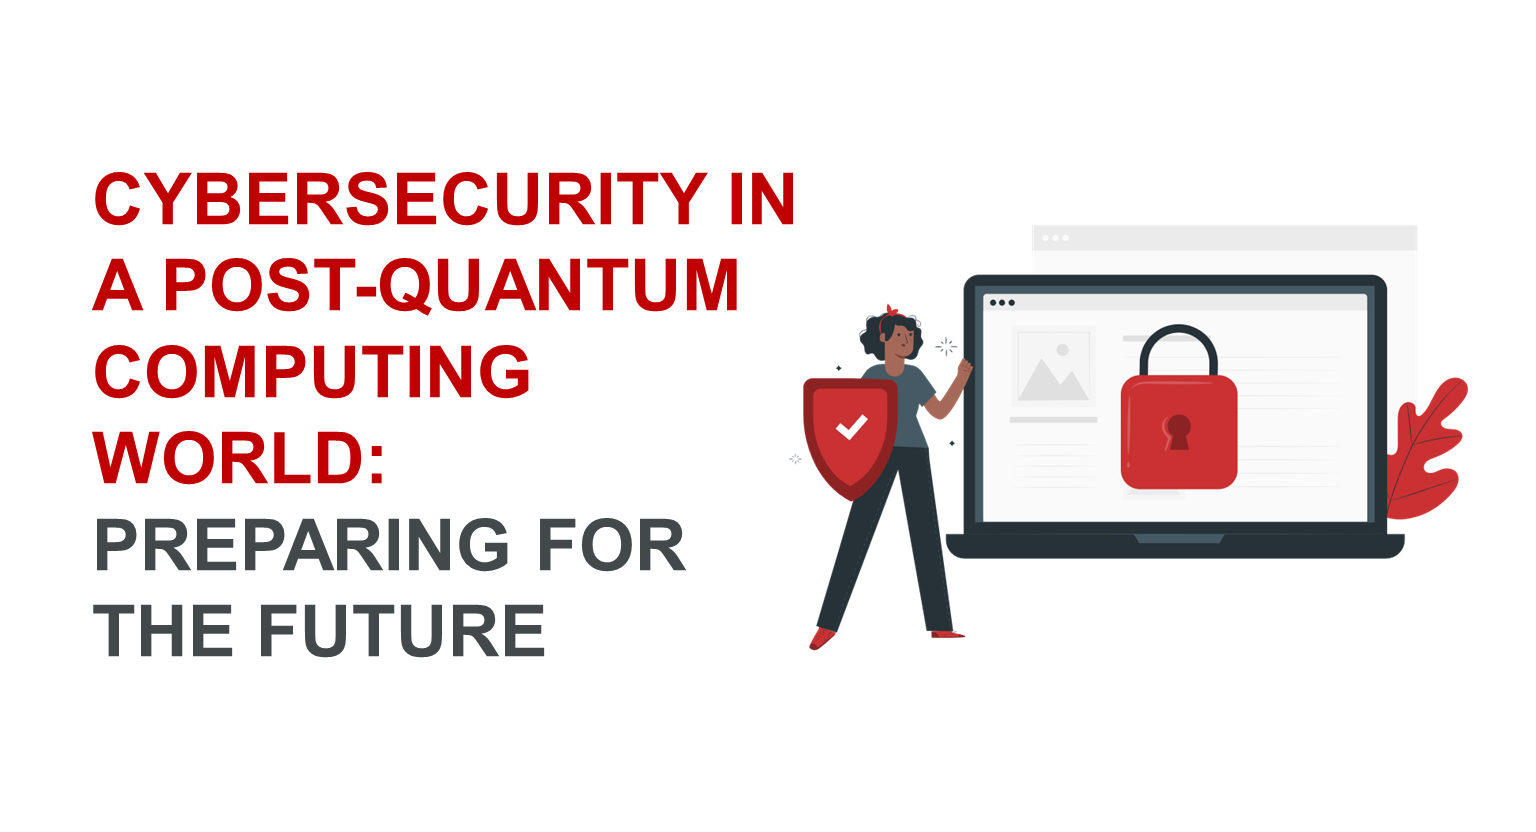 Cybersecurity in a Post-Quantum Computing World: Preparing for the Future